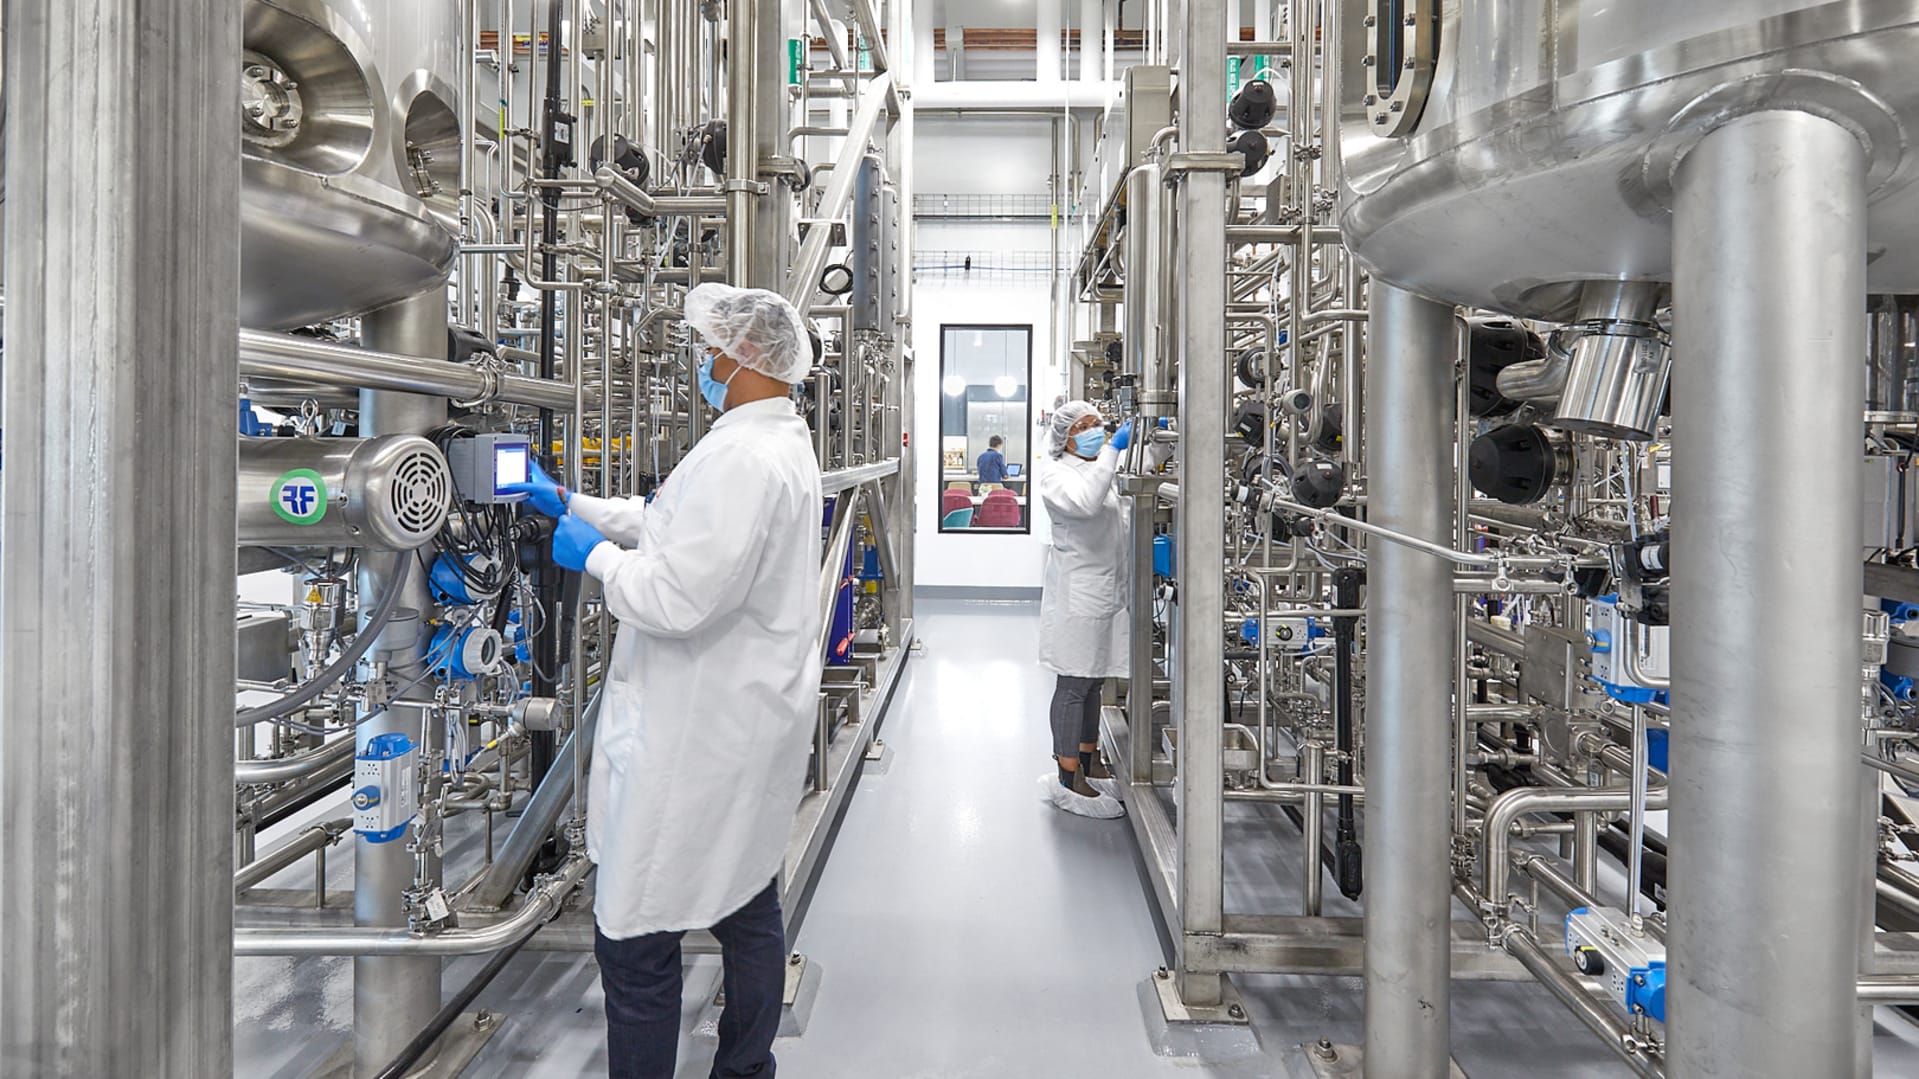 Take a look inside this shiny, industrial “cultivated meat” factory of the future